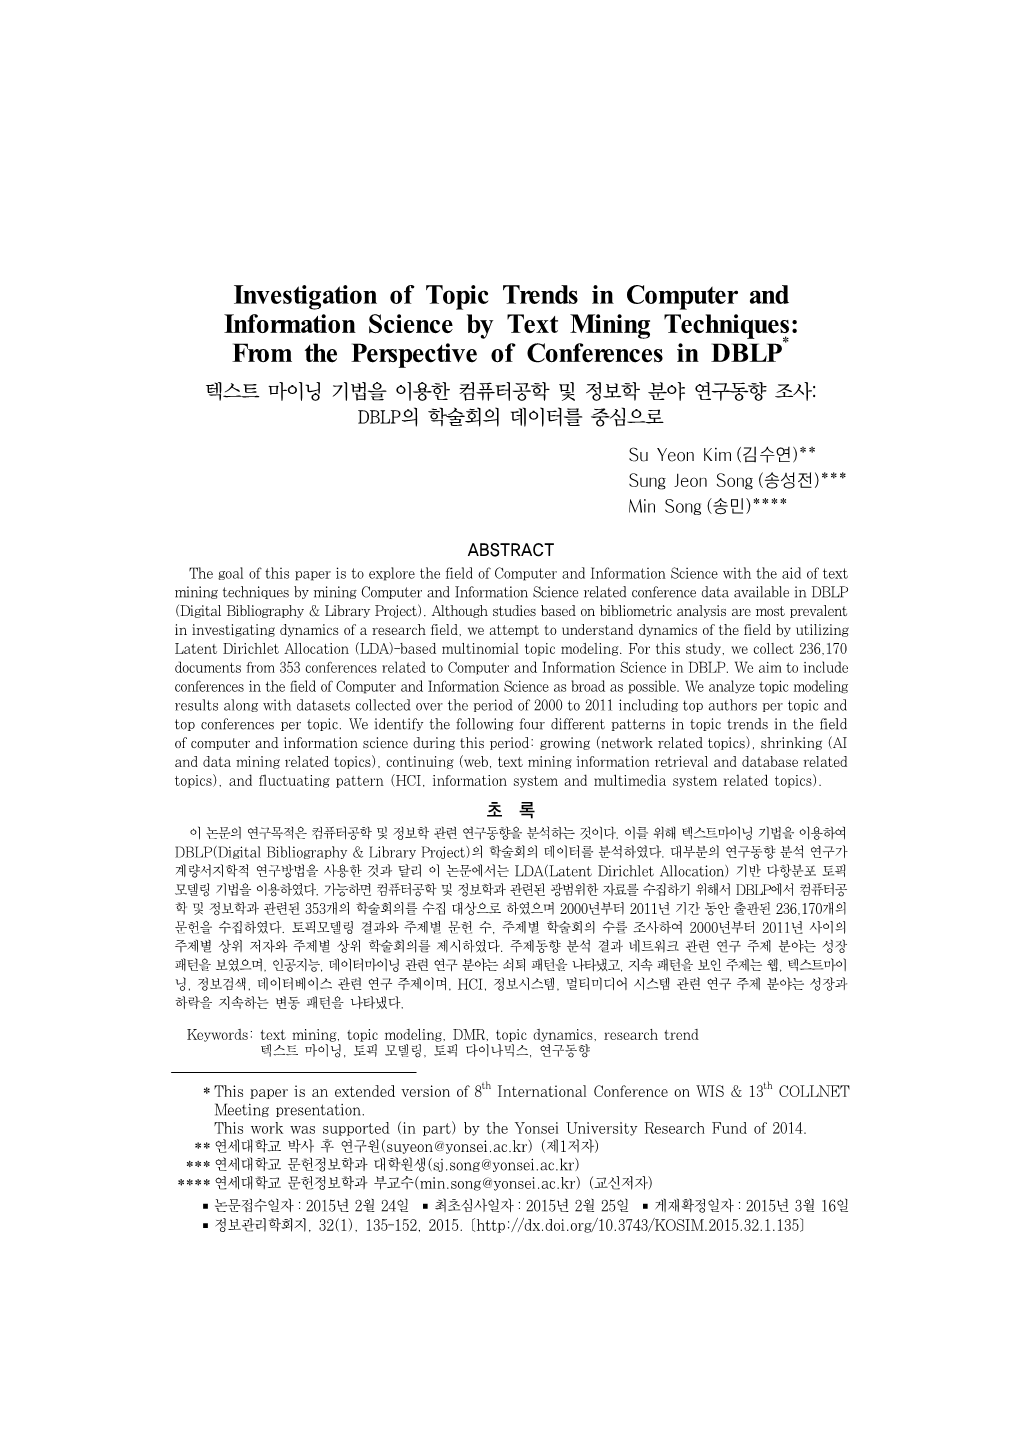 Investigation of Topic Trends in Computer and Information Science